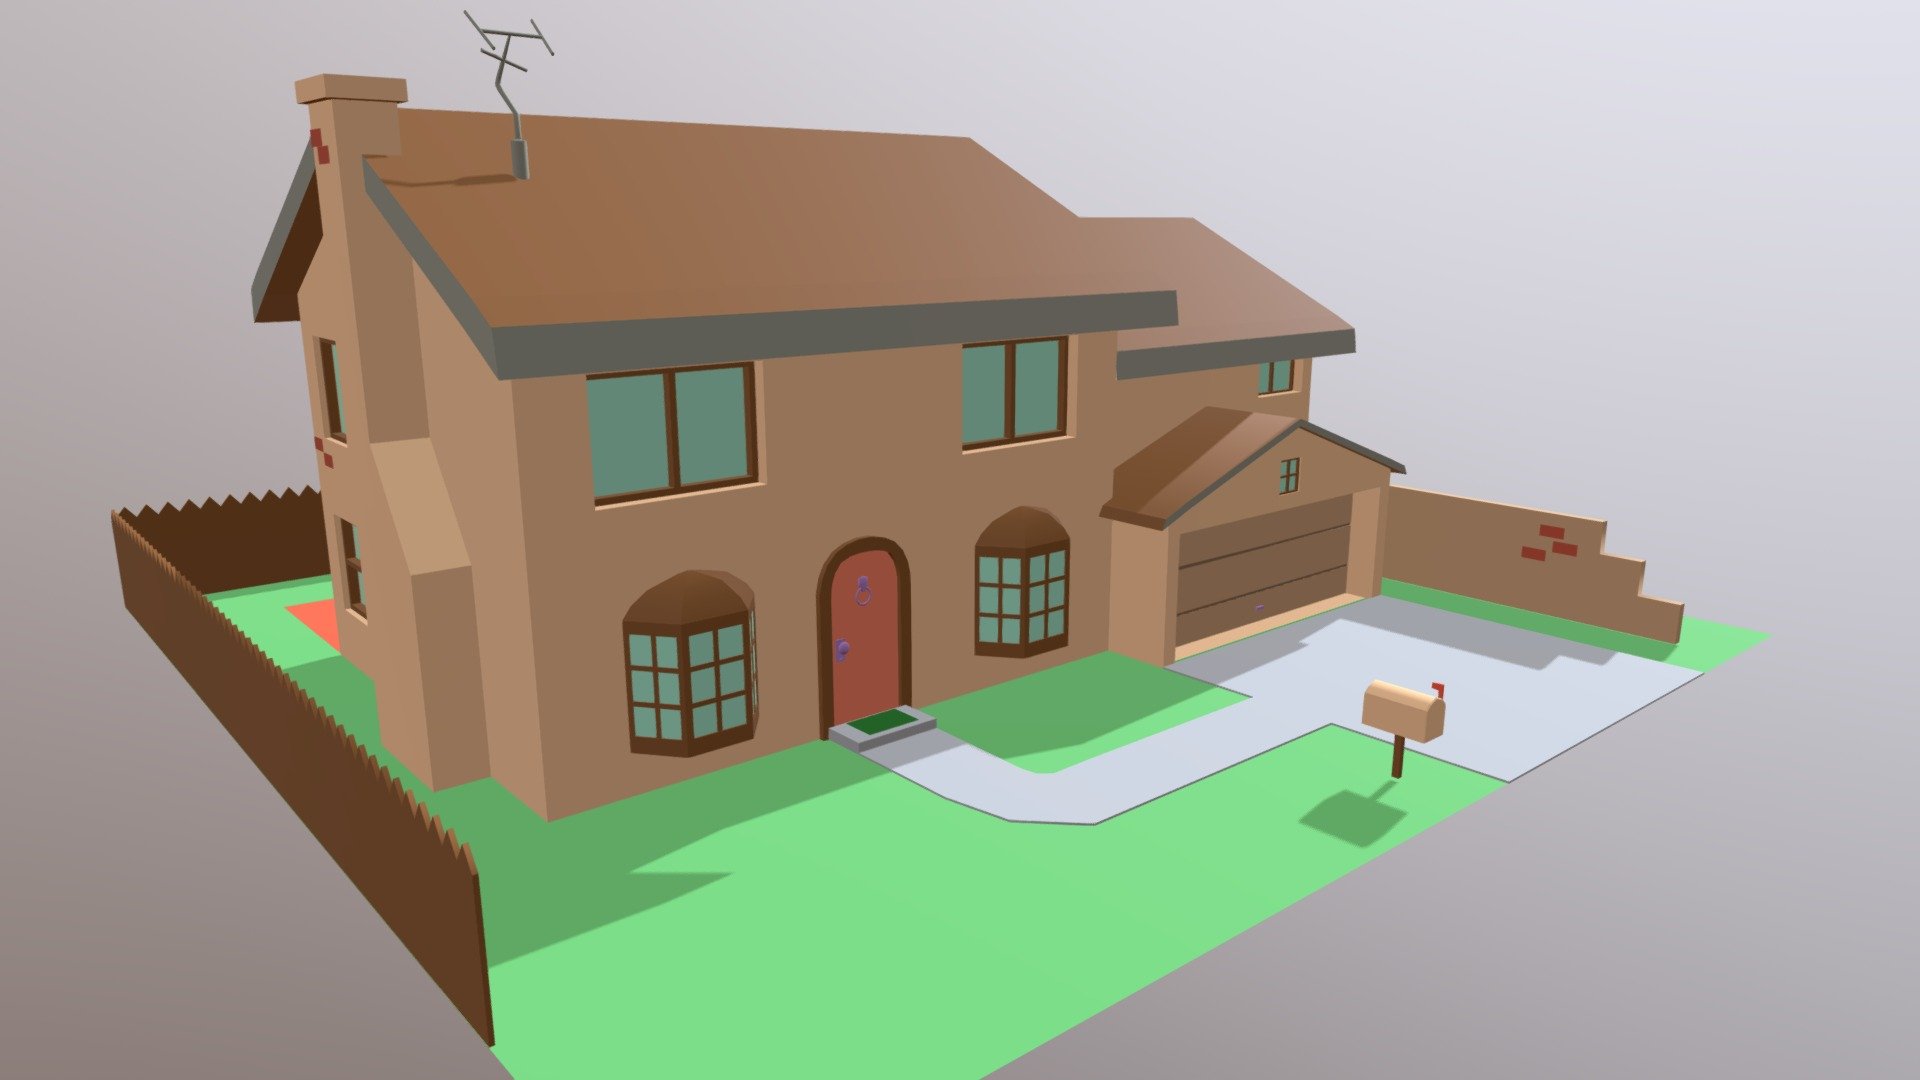 A quick modelling study about the Simpson's house, made in Autodesk Maya 3d model